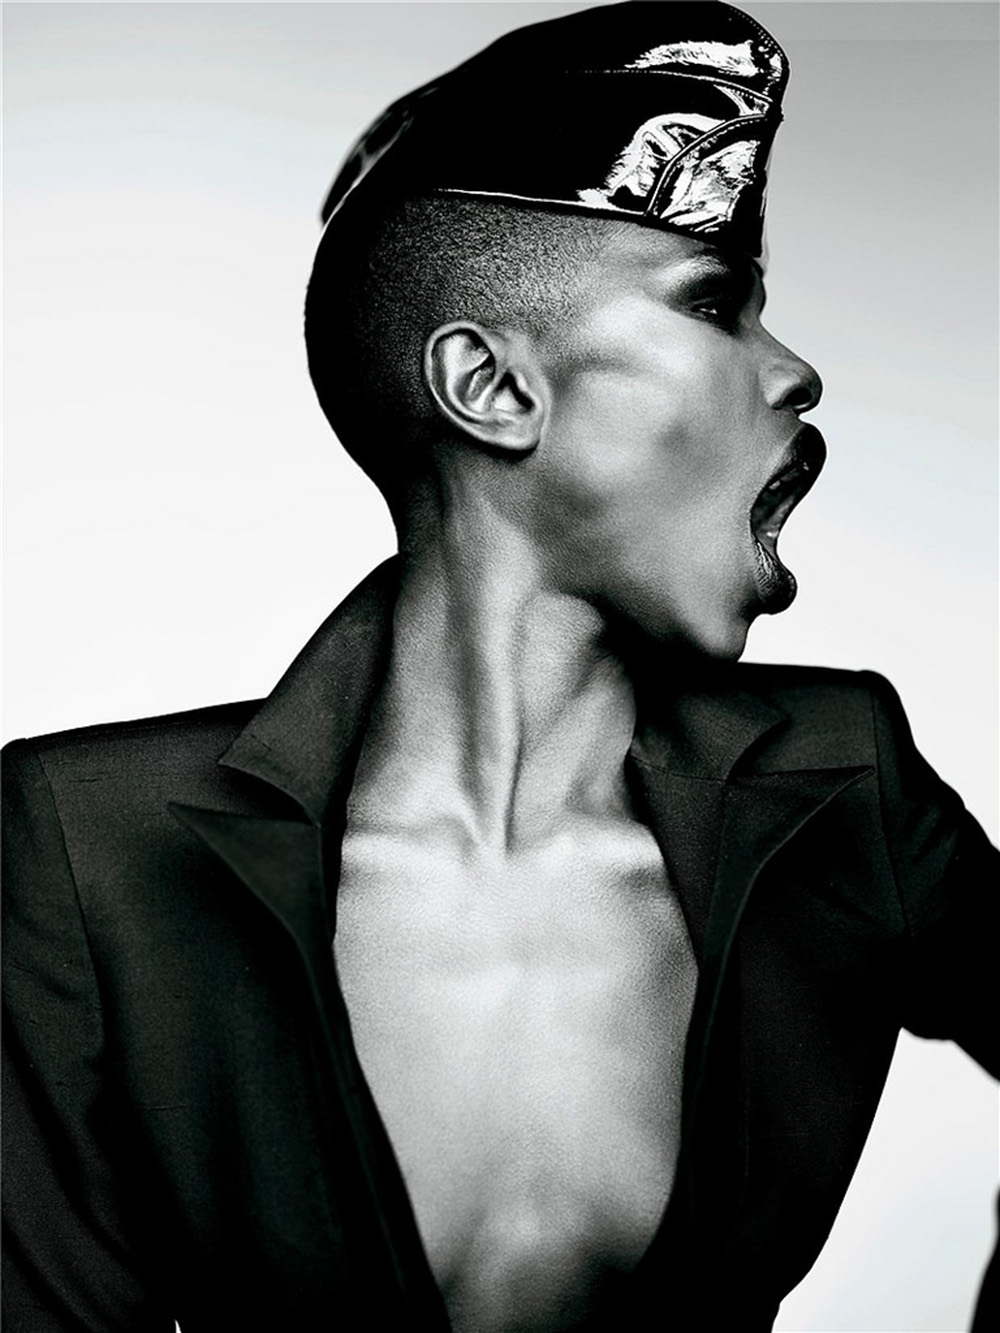 Singer, songwriter and superstar Grace Jones has an enduring fashion influence in fearless sex-appeal.